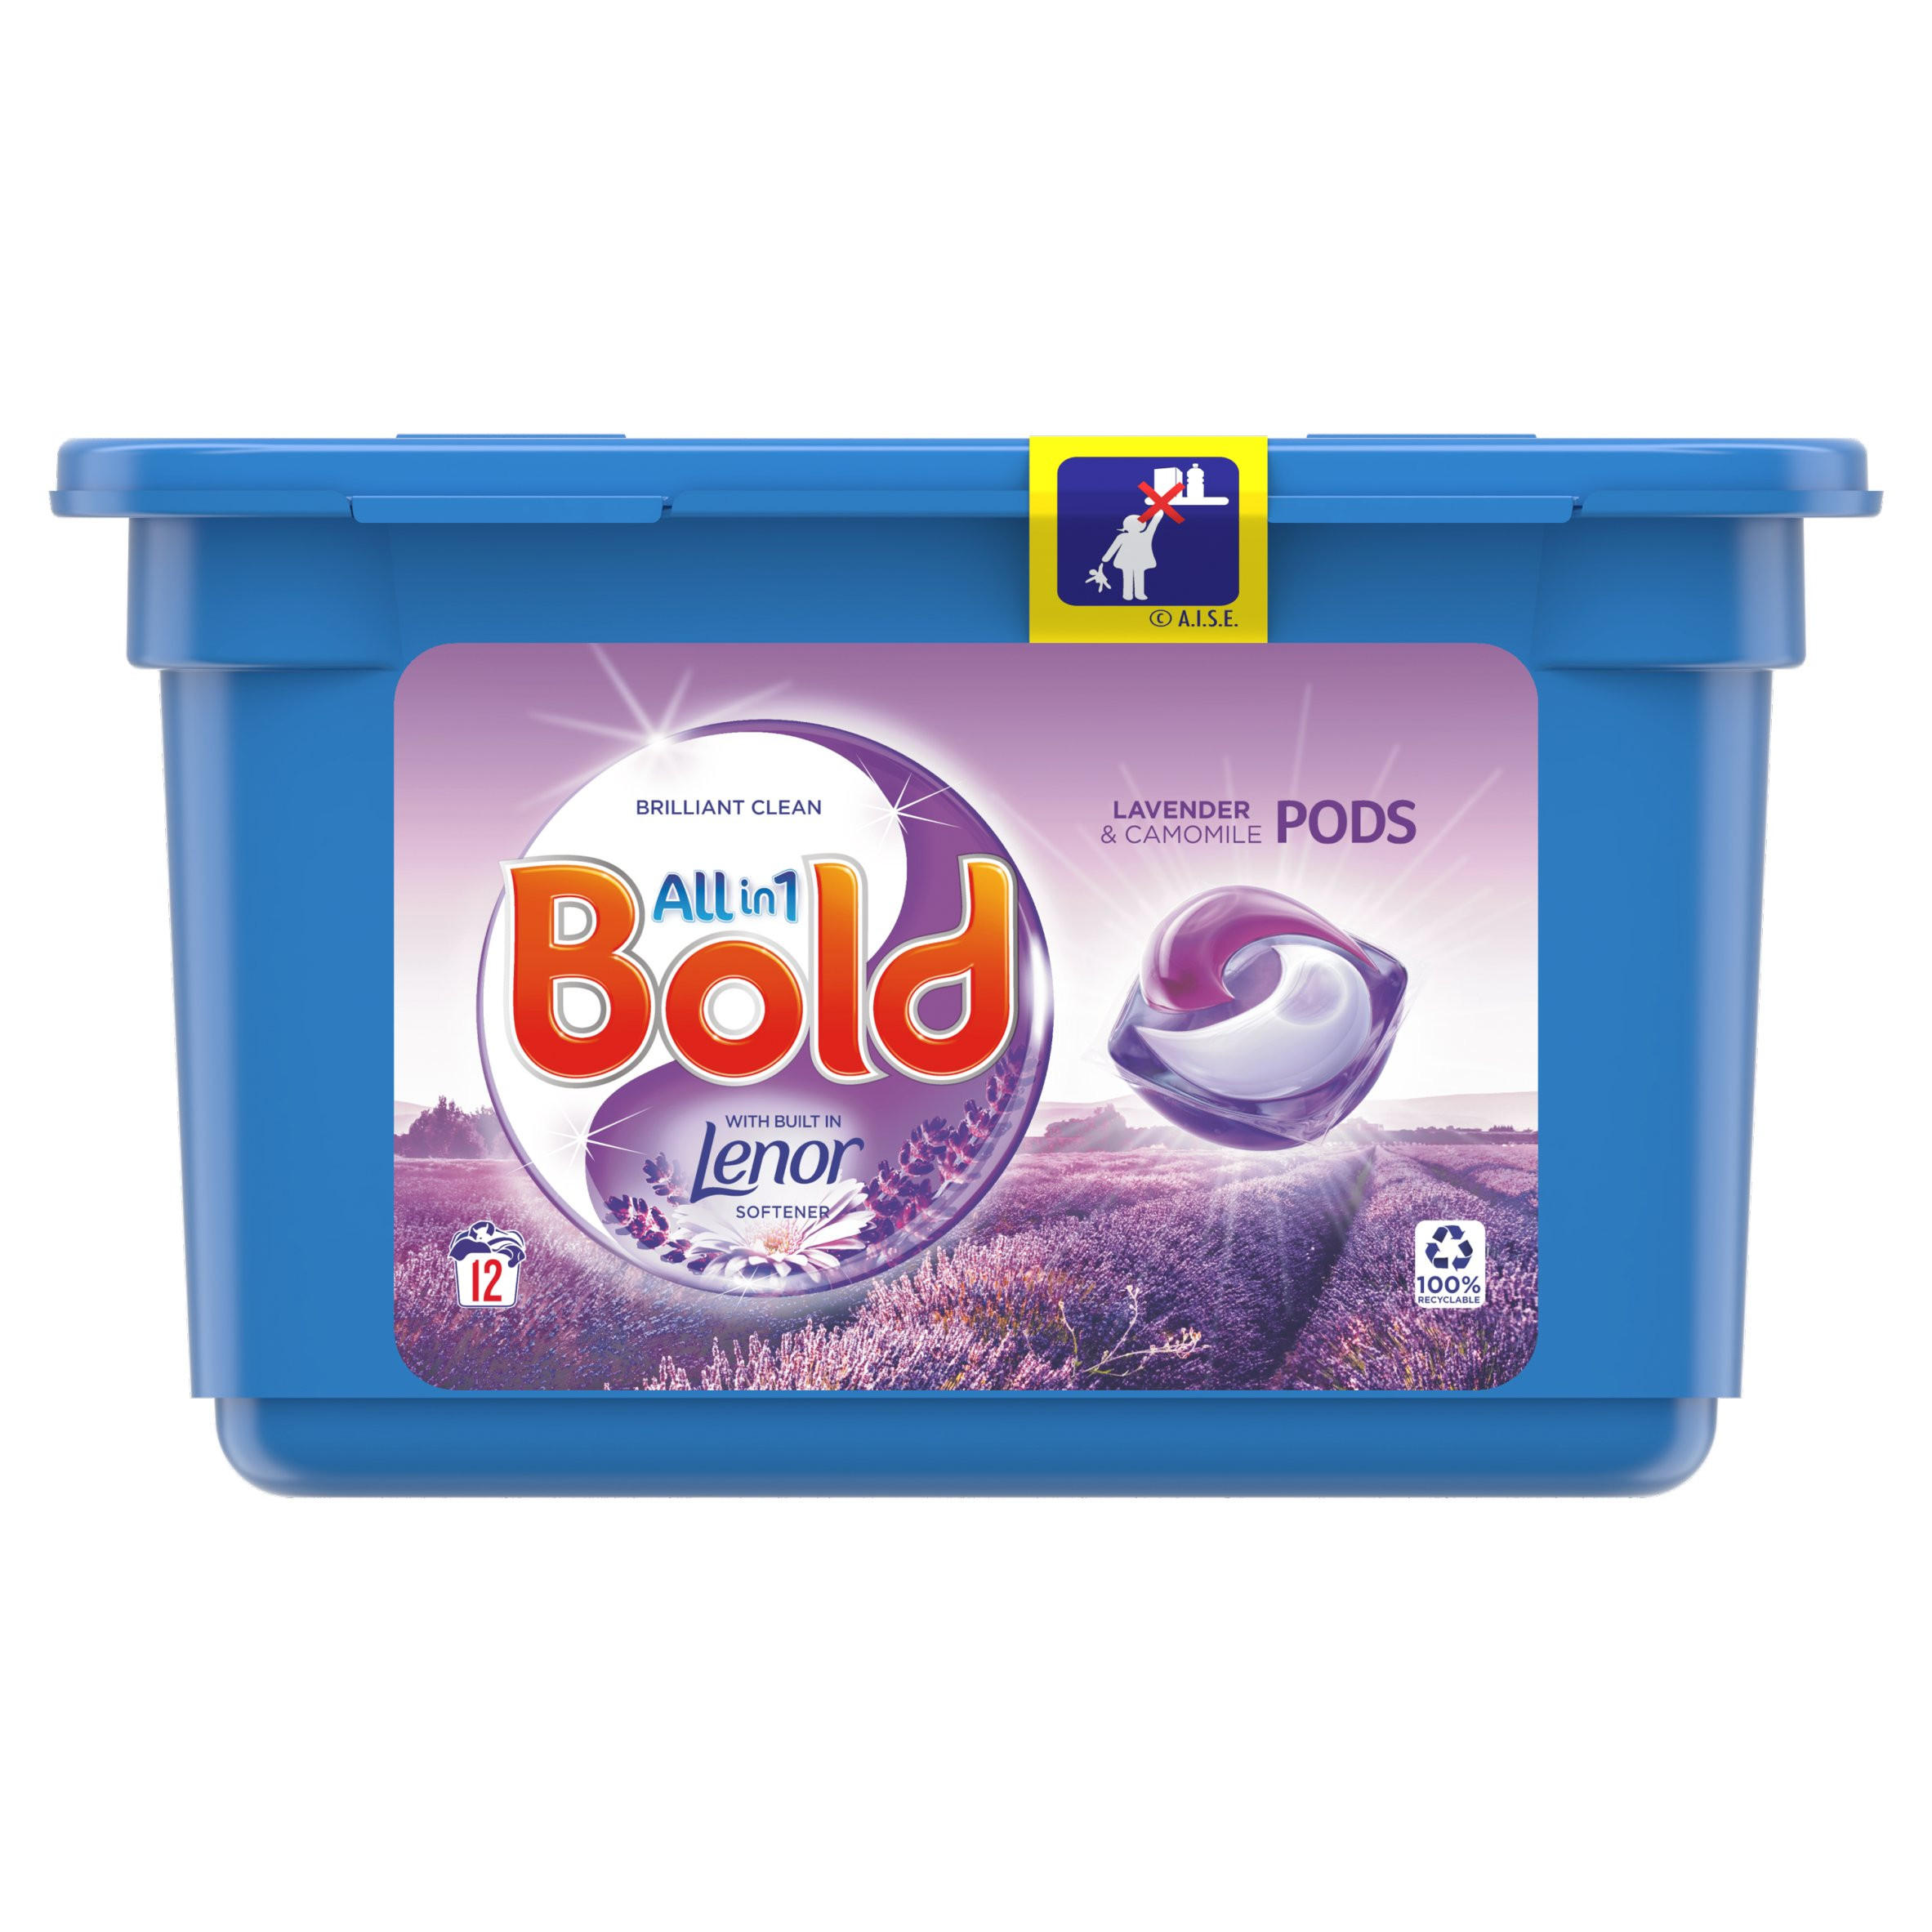 Bold All-in-1 Pods Washing Capsules Lavender & Camomile 12 Washes ...